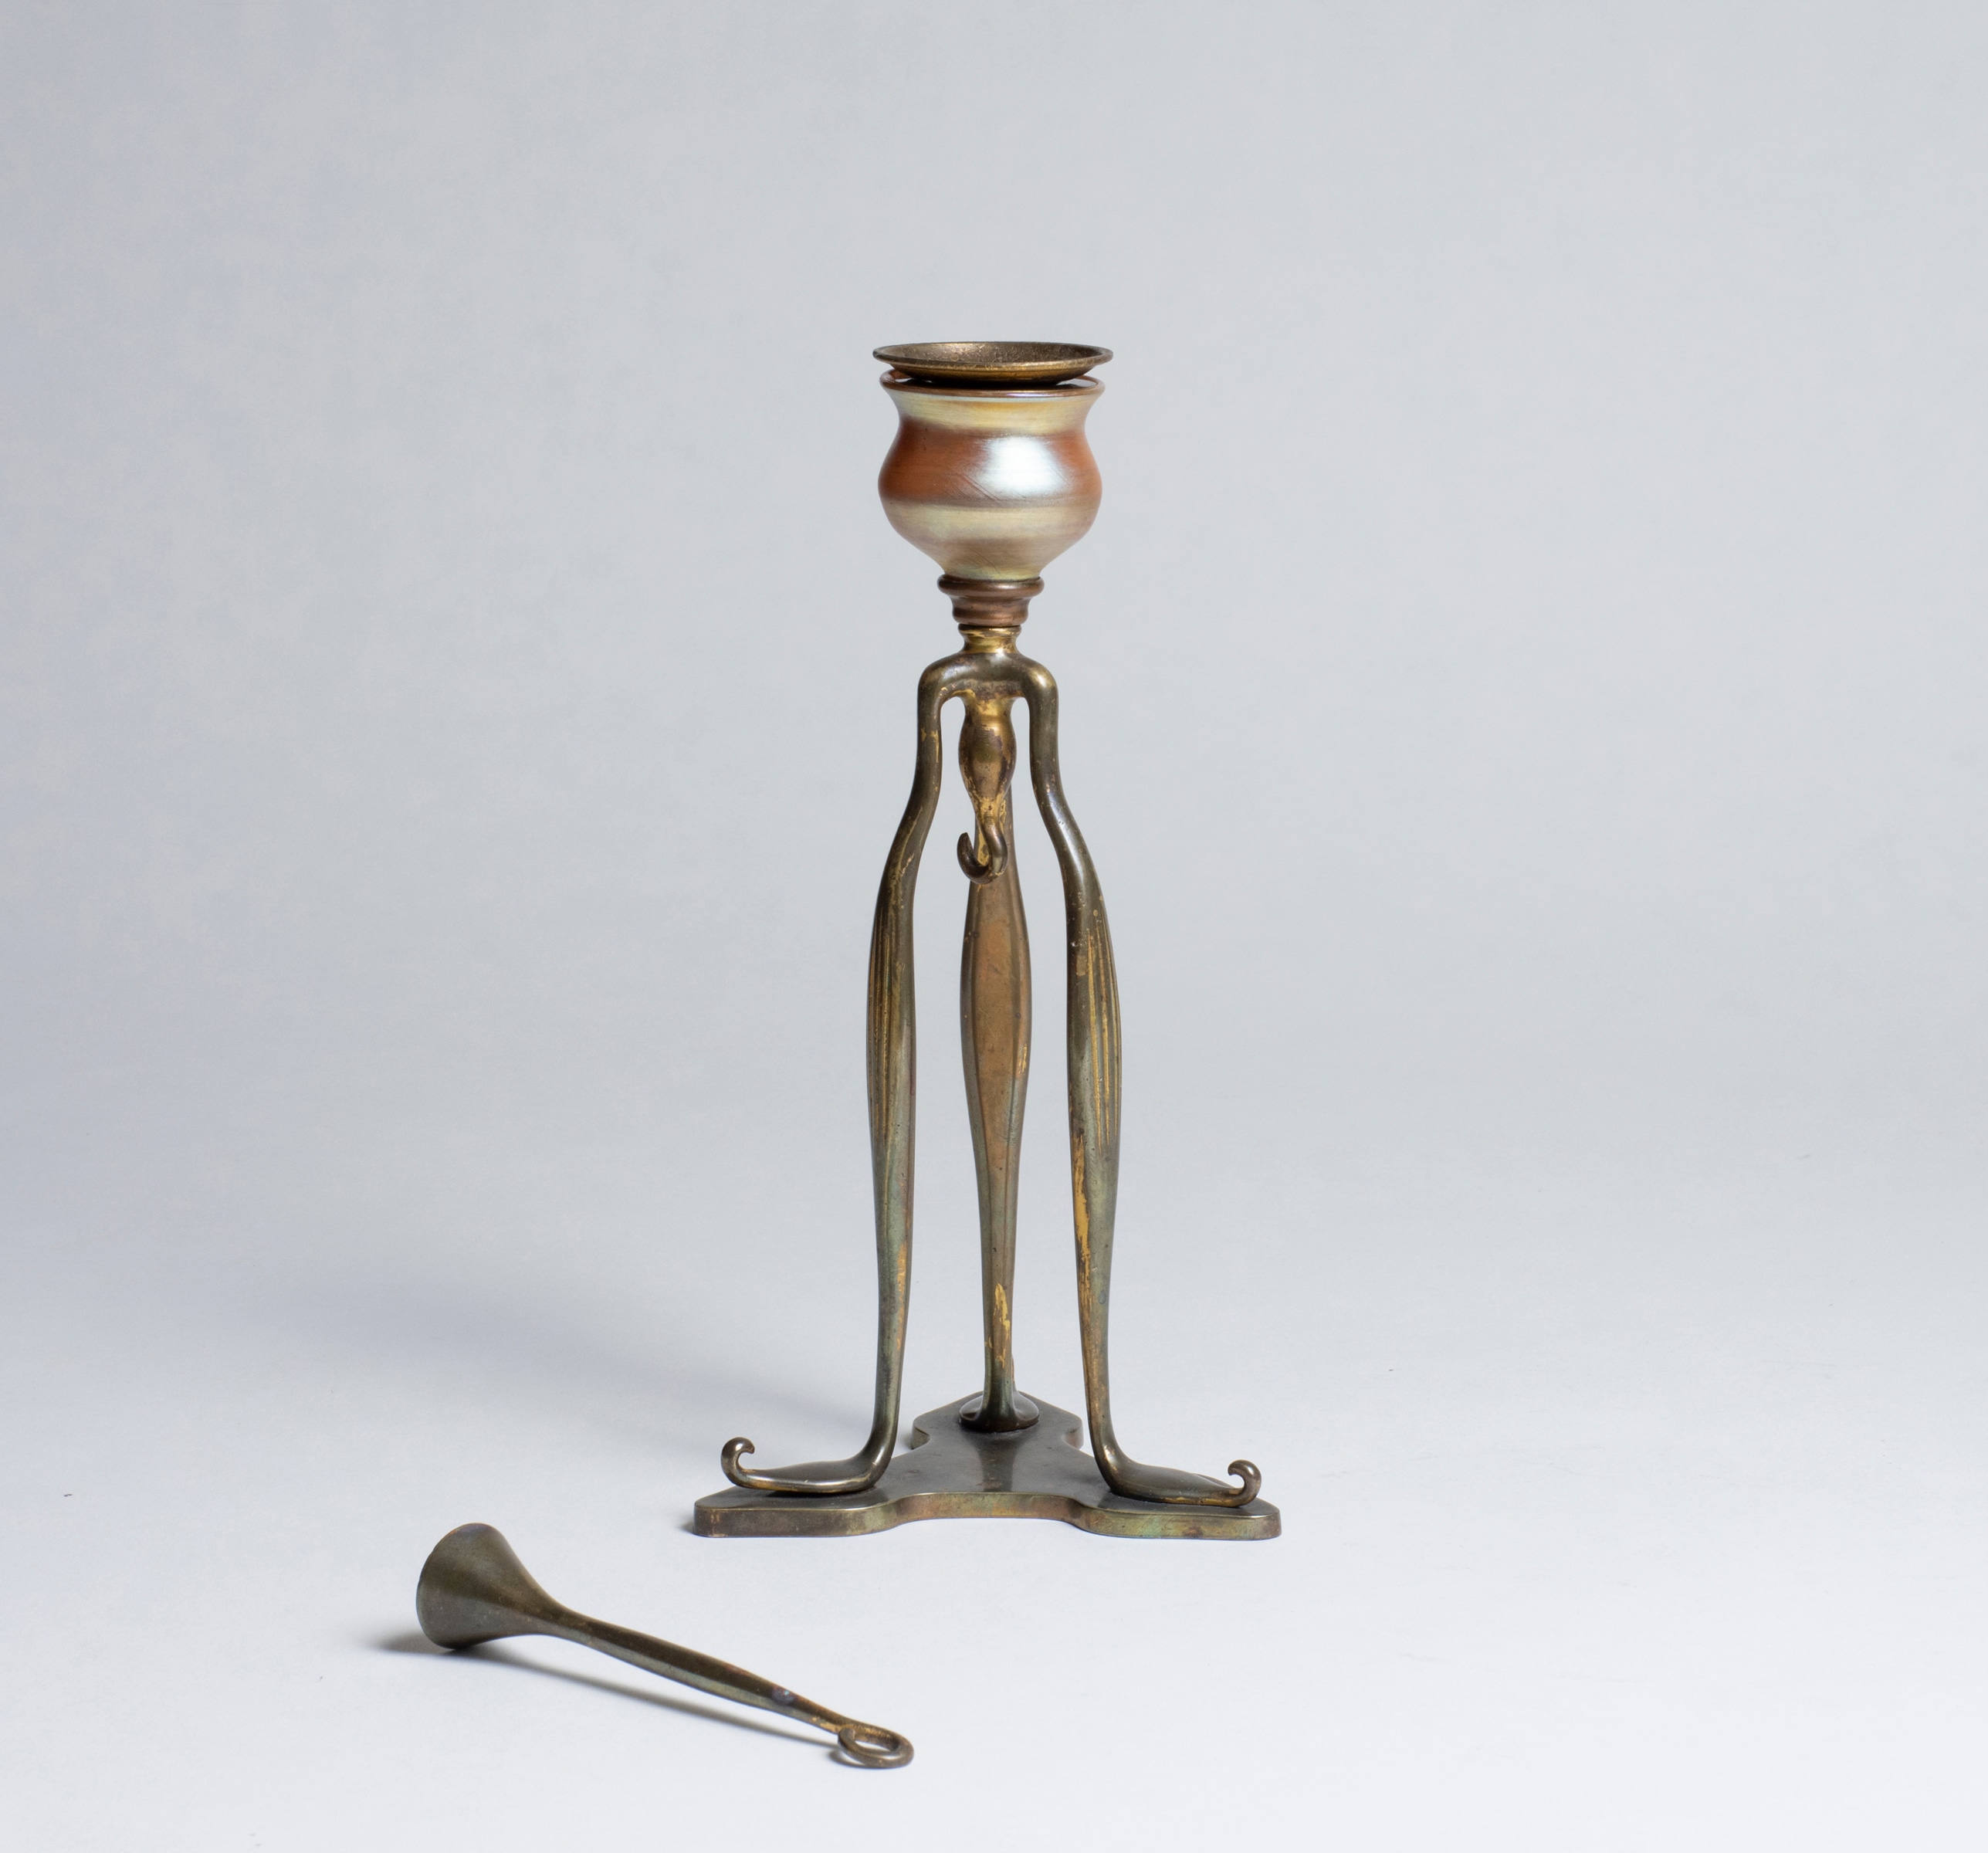 A tiffany studios candlestick, the bronze tripod form with a gold iridescent finial as part of the candle cup; here, showing the matching snuffer which hangs from a hook in the base.